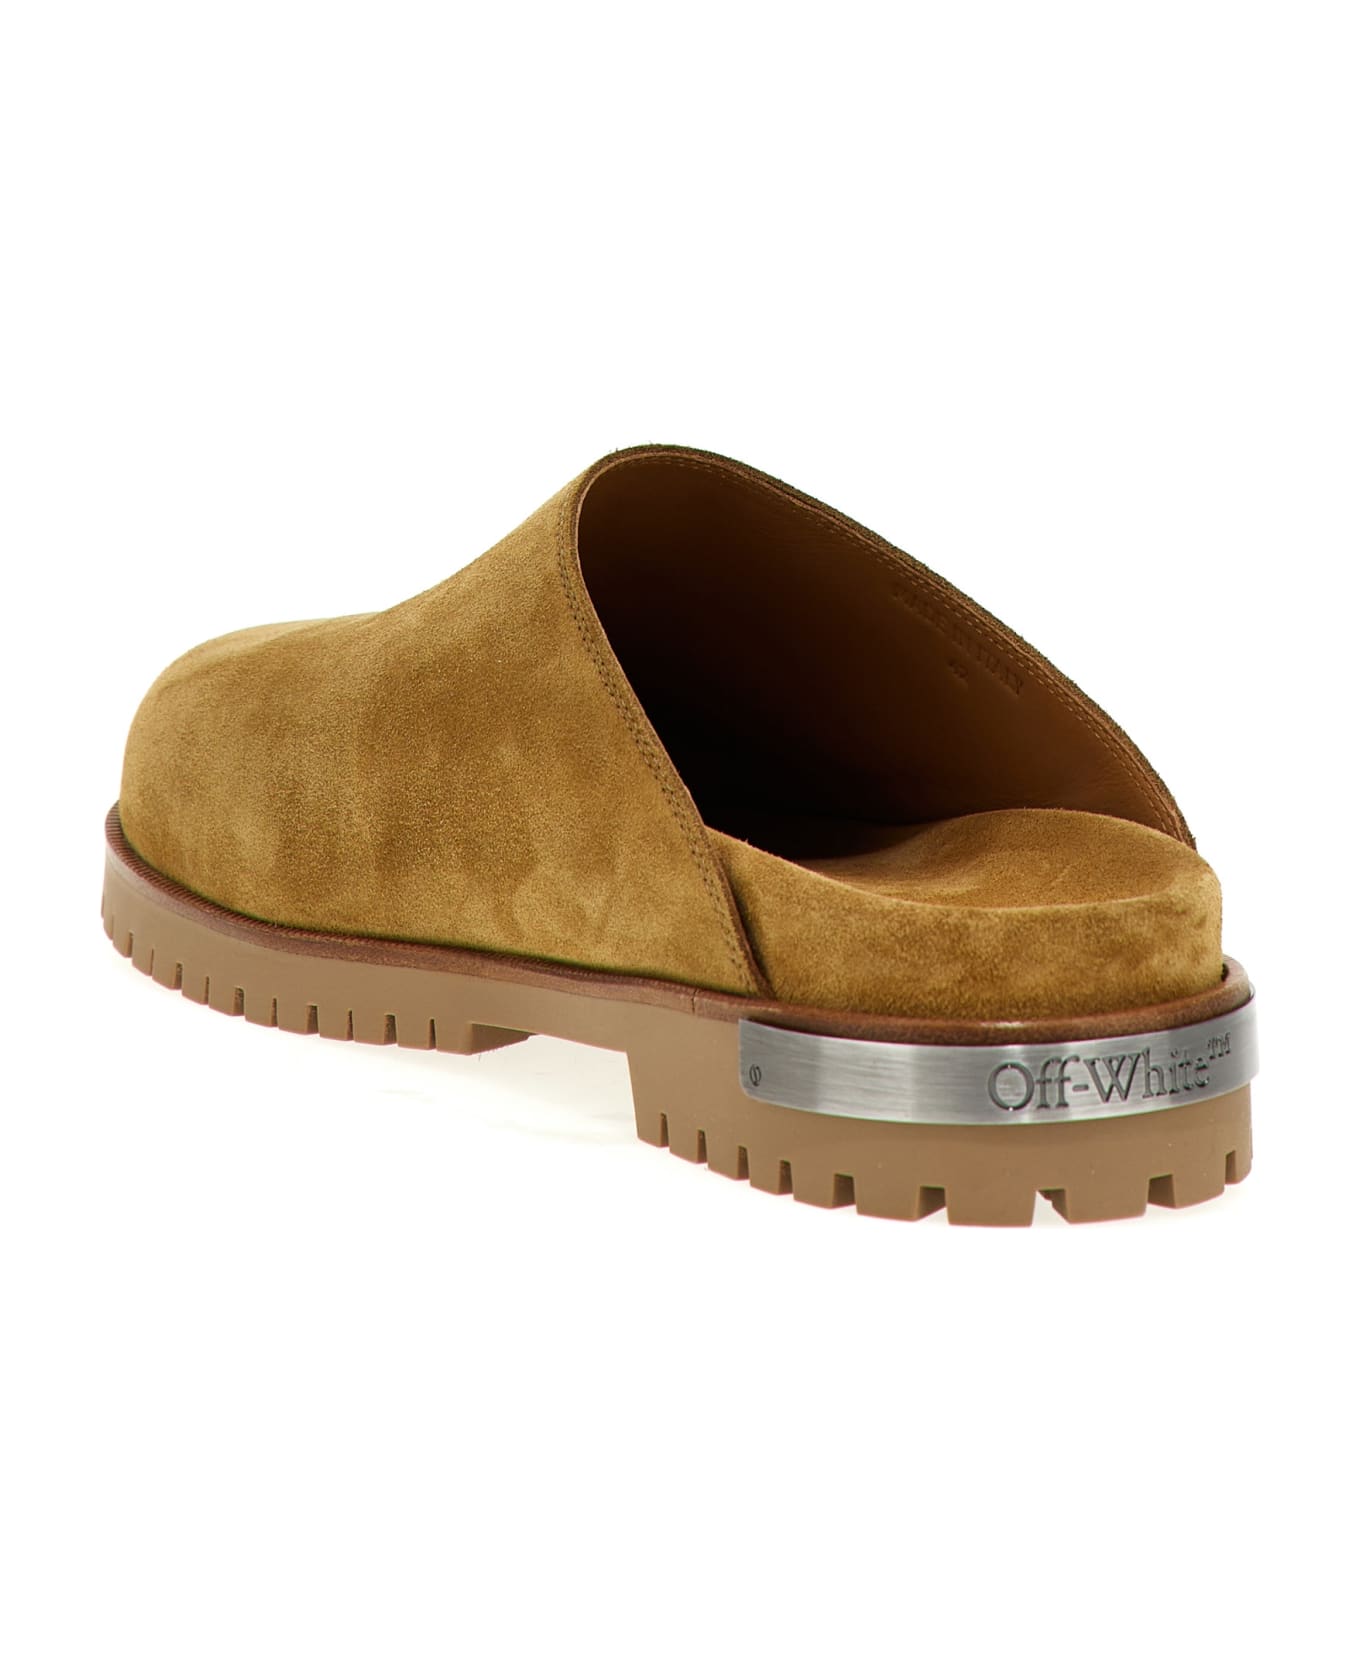 Off-White Metal Logo Clogs - Beige その他各種シューズ